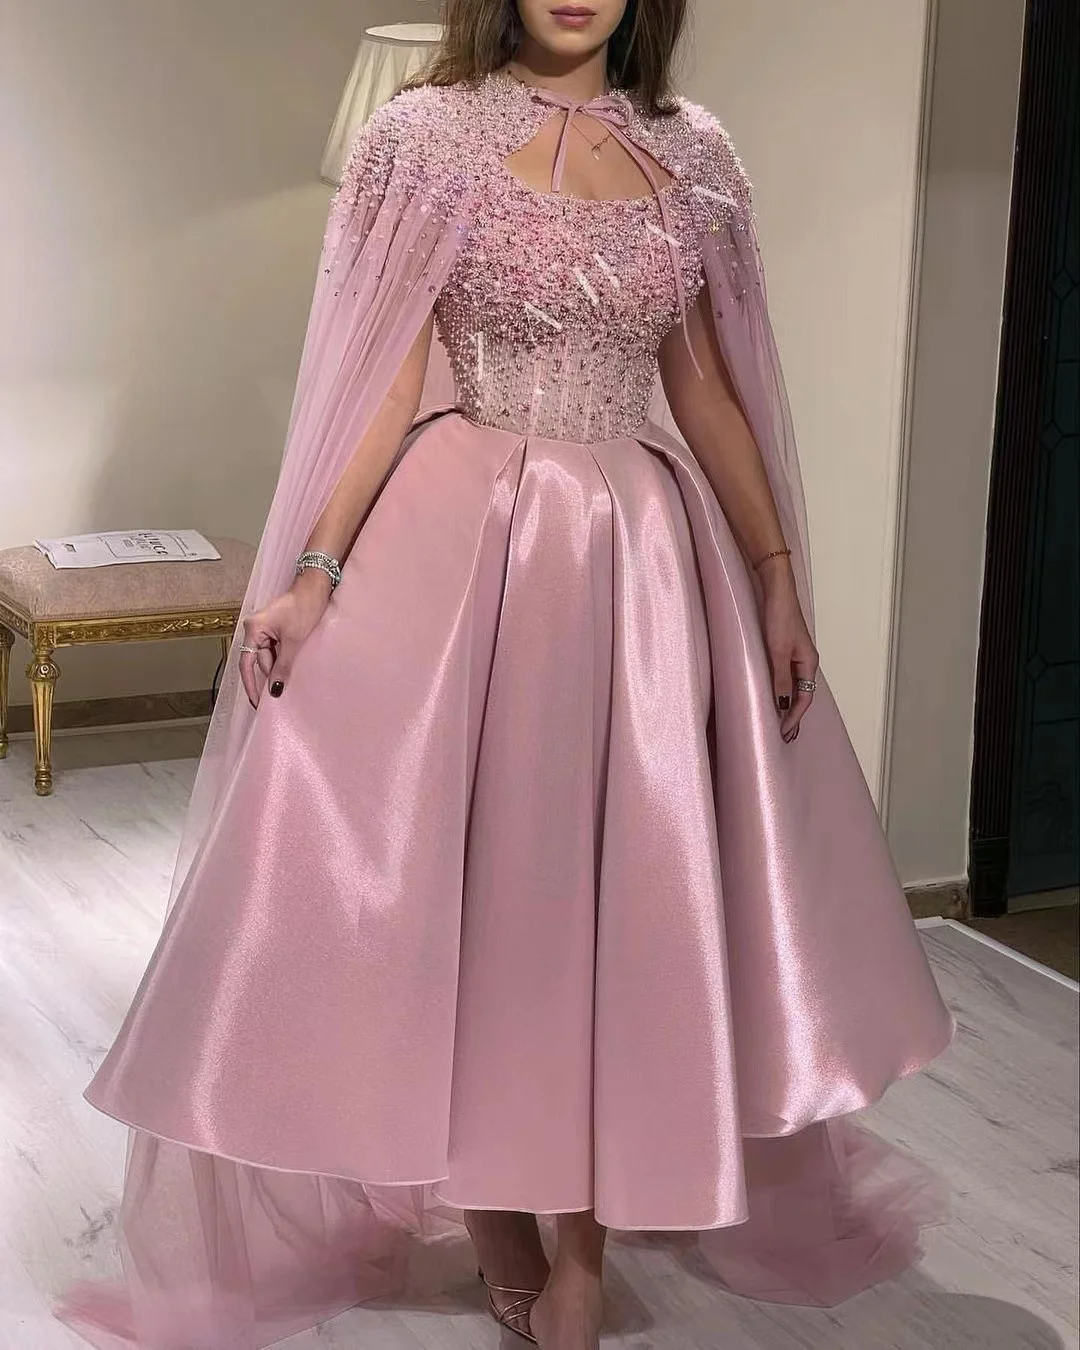 

Pink Off the Shoulder Tulle Cocktail Dress Beading Beads Crystal Shiny A Line Women Ball Gown With Cape Tea Length Homecoming